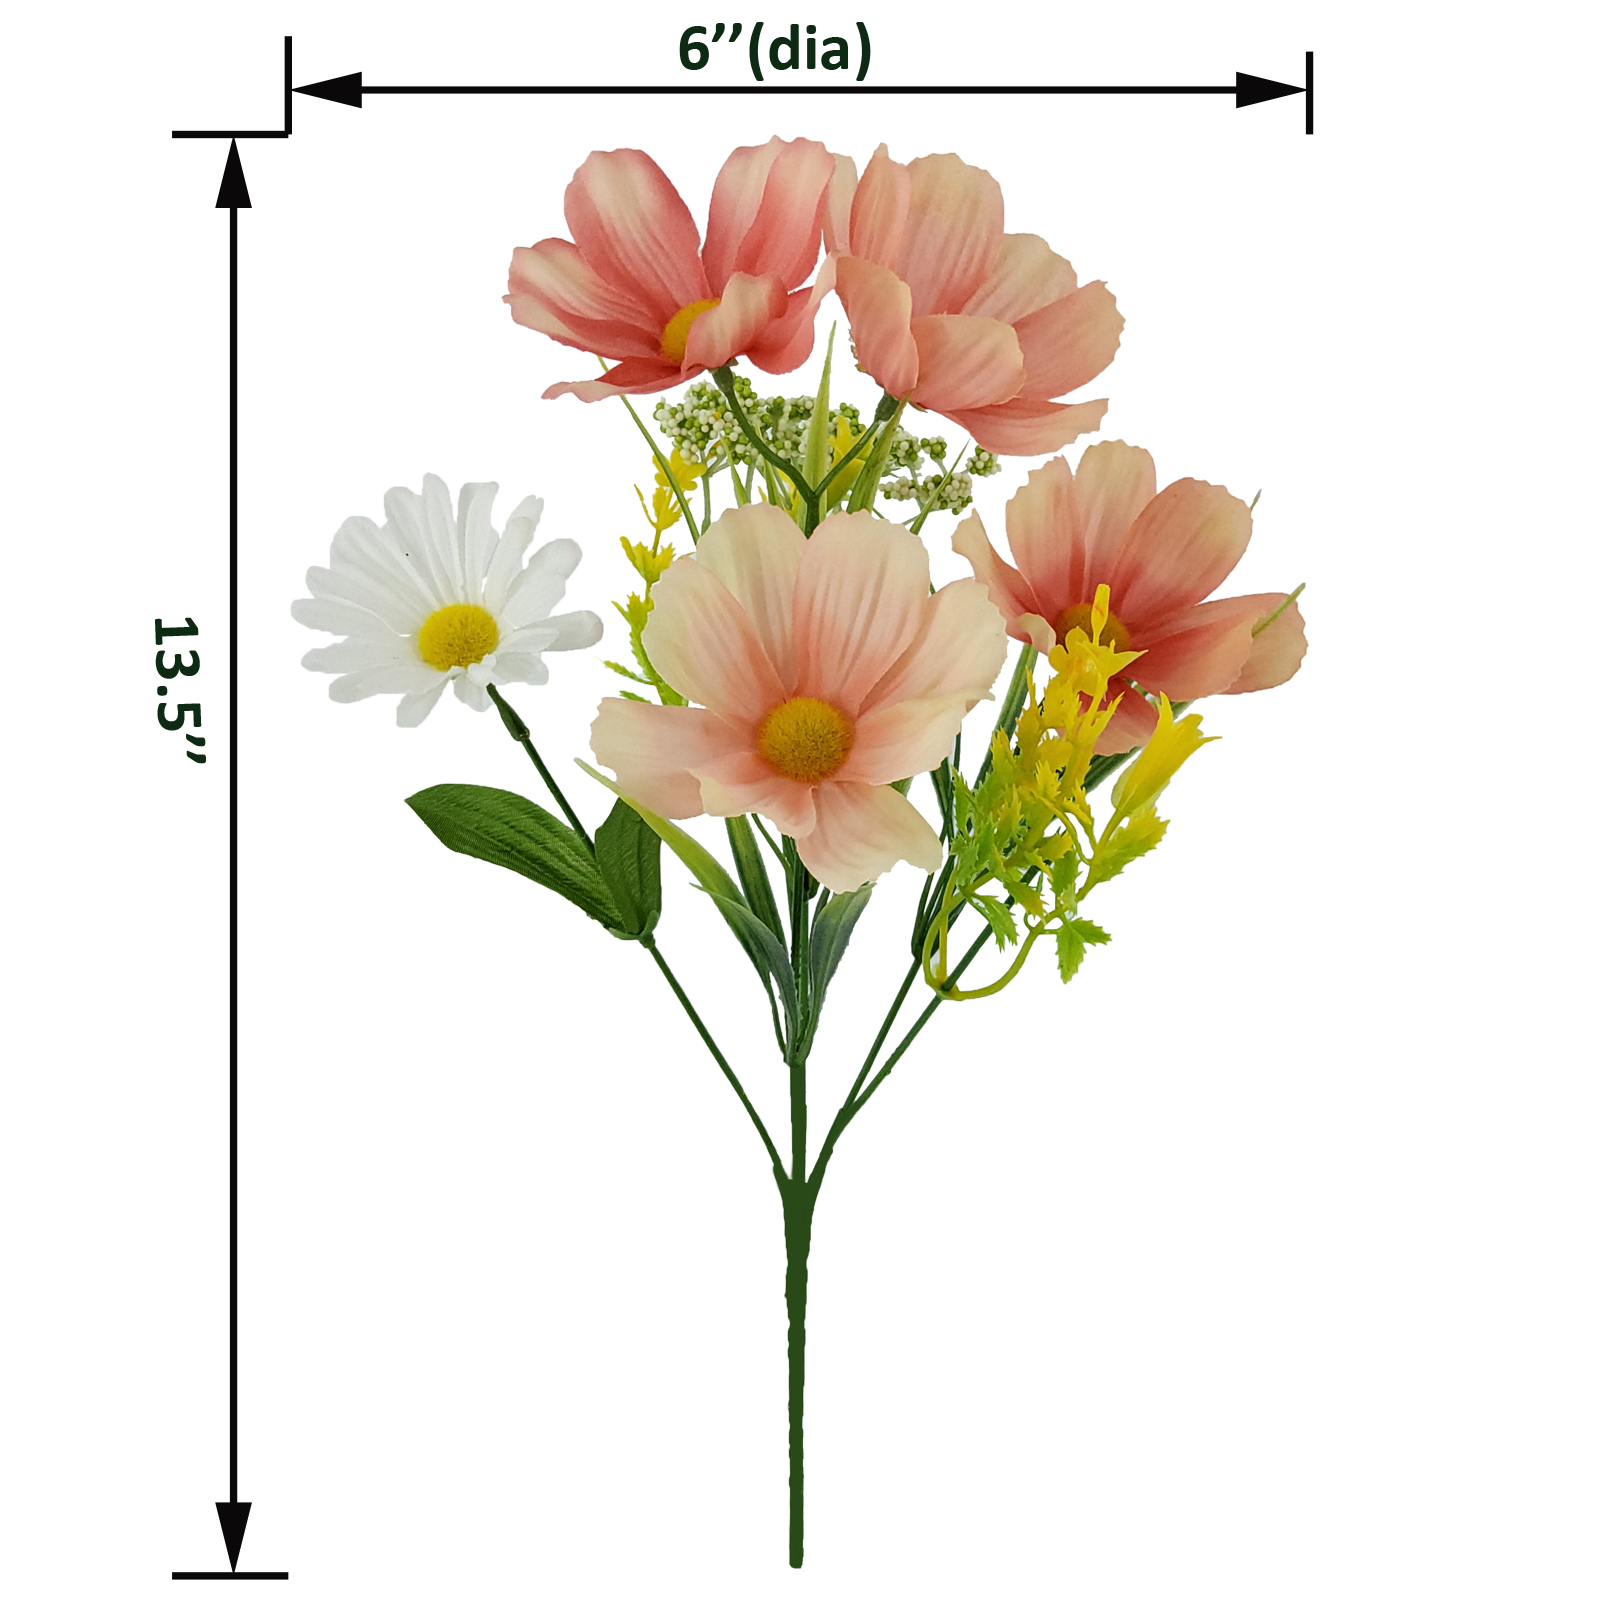 Mainstays 13.5" Indoor Artificial Cosmos Floral Mix Pick, Pink Color. - image 3 of 5